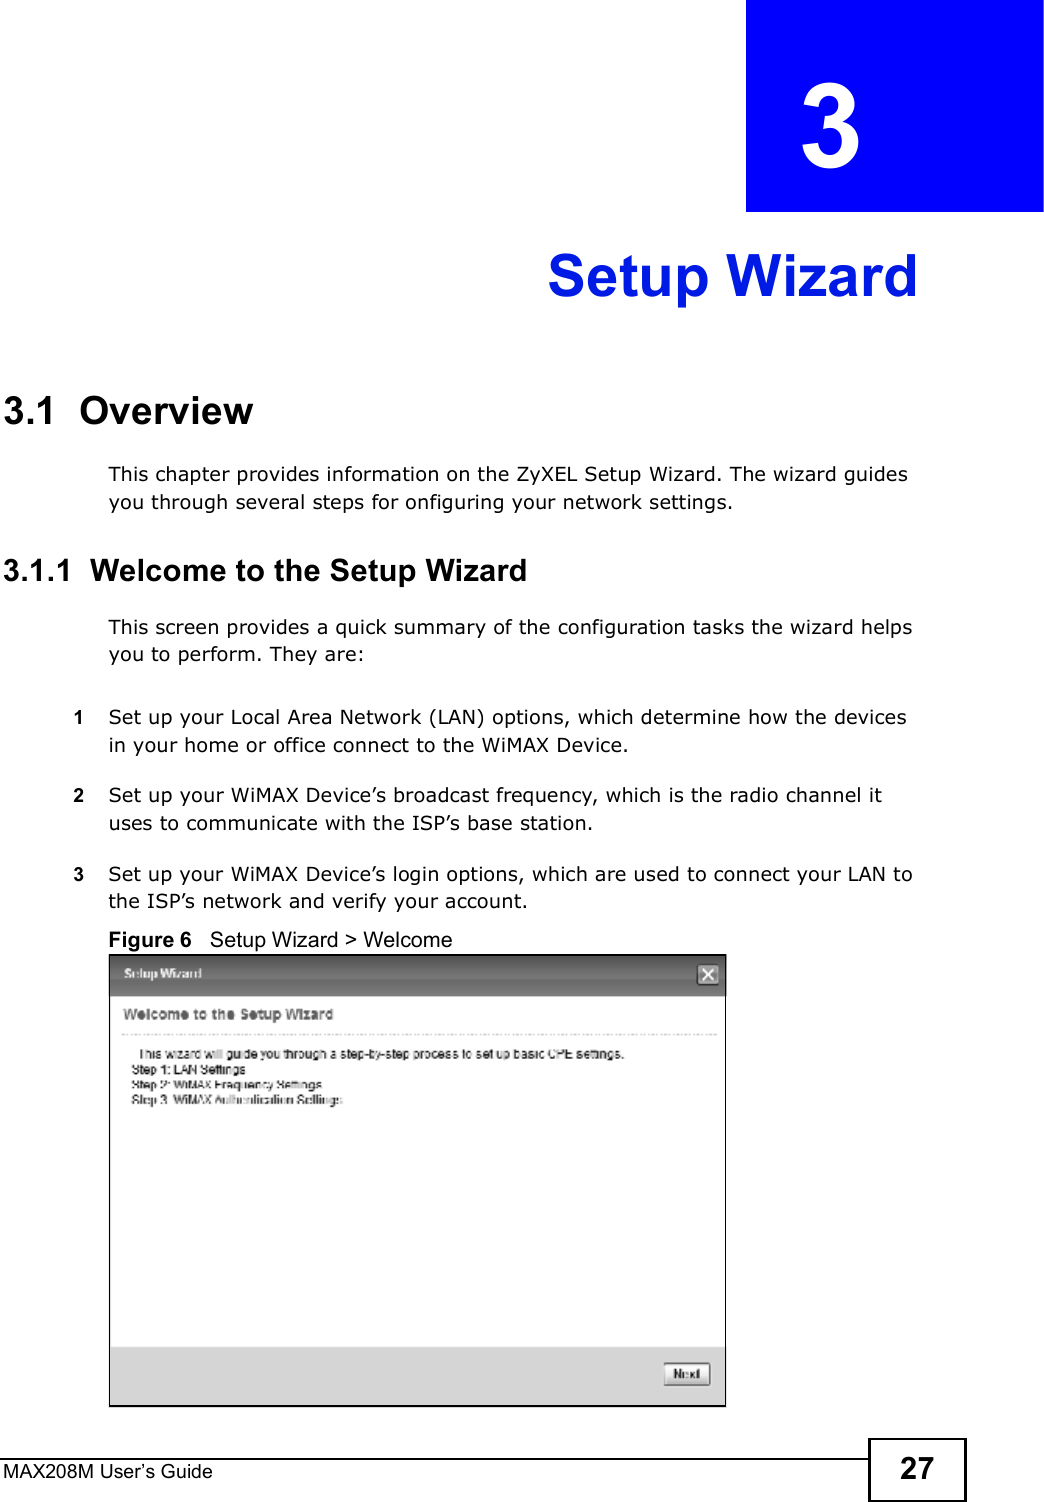 MAX208M User s Guide 27CHAPTER  3 Setup Wizard3.1  OverviewThis chapter provides information on the ZyXEL Setup Wizard. The wizard guides you through several steps for onfiguring your network settings.3.1.1  Welcome to the Setup WizardThis screen provides a quick summary of the configuration tasks the wizard helps you to perform. They are:1Set up your Local Area Network (LAN) options, which determine how the devices in your home or office connect to the WiMAX Device.2Set up your WiMAX Device s broadcast frequency, which is the radio channel it uses to communicate with the ISP s base station.3Set up your WiMAX Device s login options, which are used to connect your LAN to the ISP s network and verify your account. Figure 6   Setup Wizard &gt; Welcome